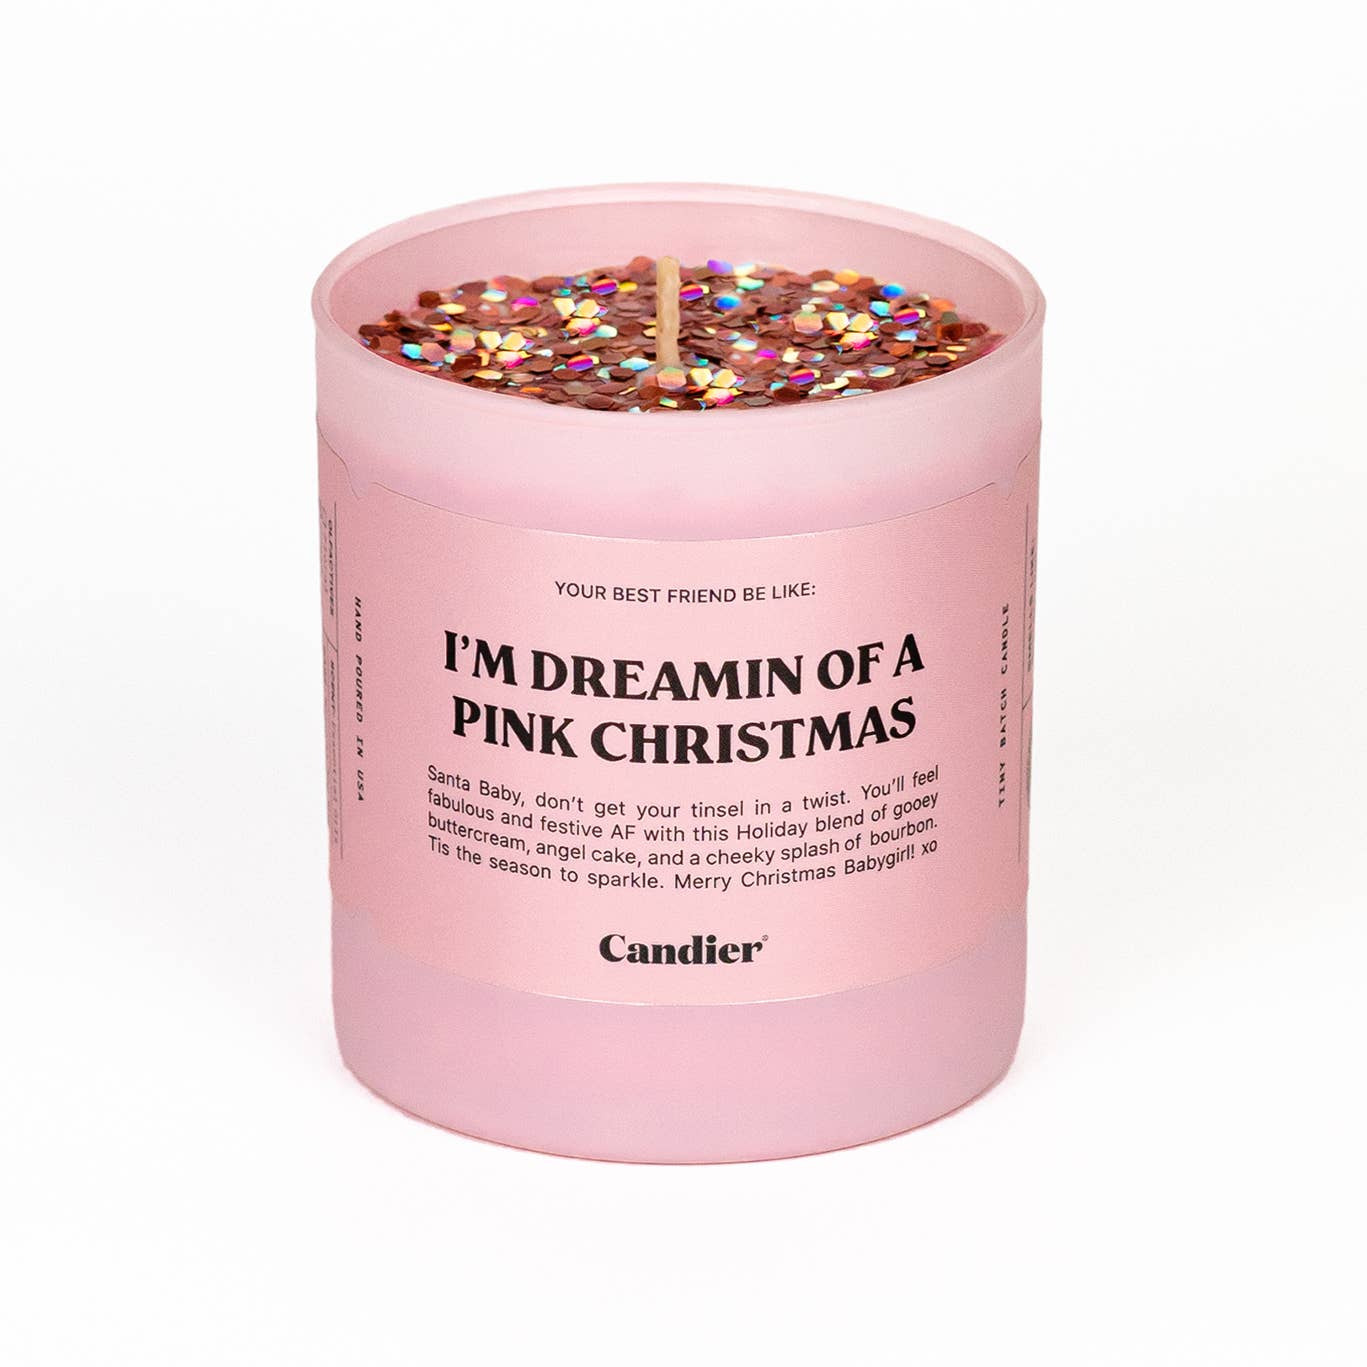 I'm Dreaming of A Pink Christmas Candle